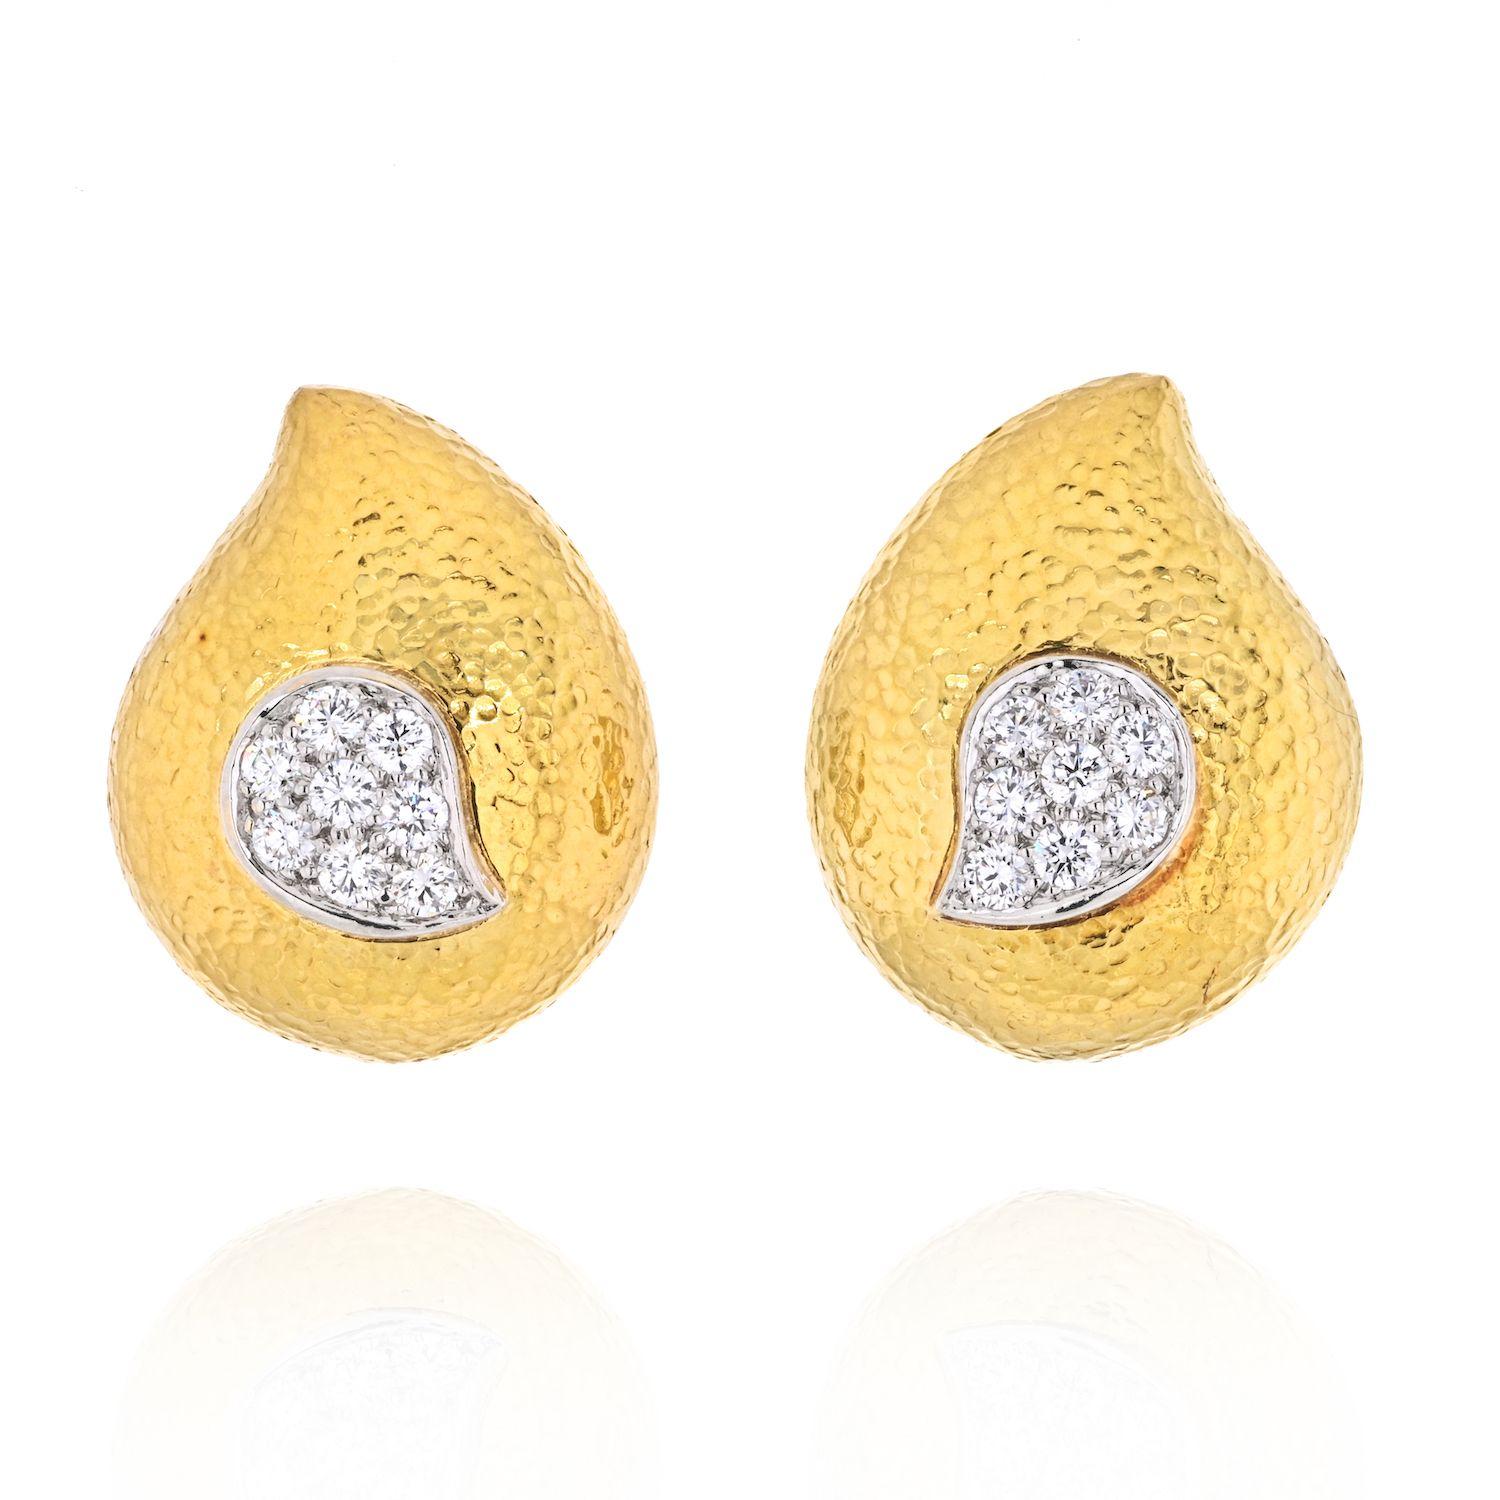 David Webb Platinum & 18K Yellow Gold Paisley Diamond Earrings. From the Ancient World Collection. Like two decadent drops of glamour, these diamond paisley raindrop earrings by David Webb are to die for. Perfect for everyday wear when you need an